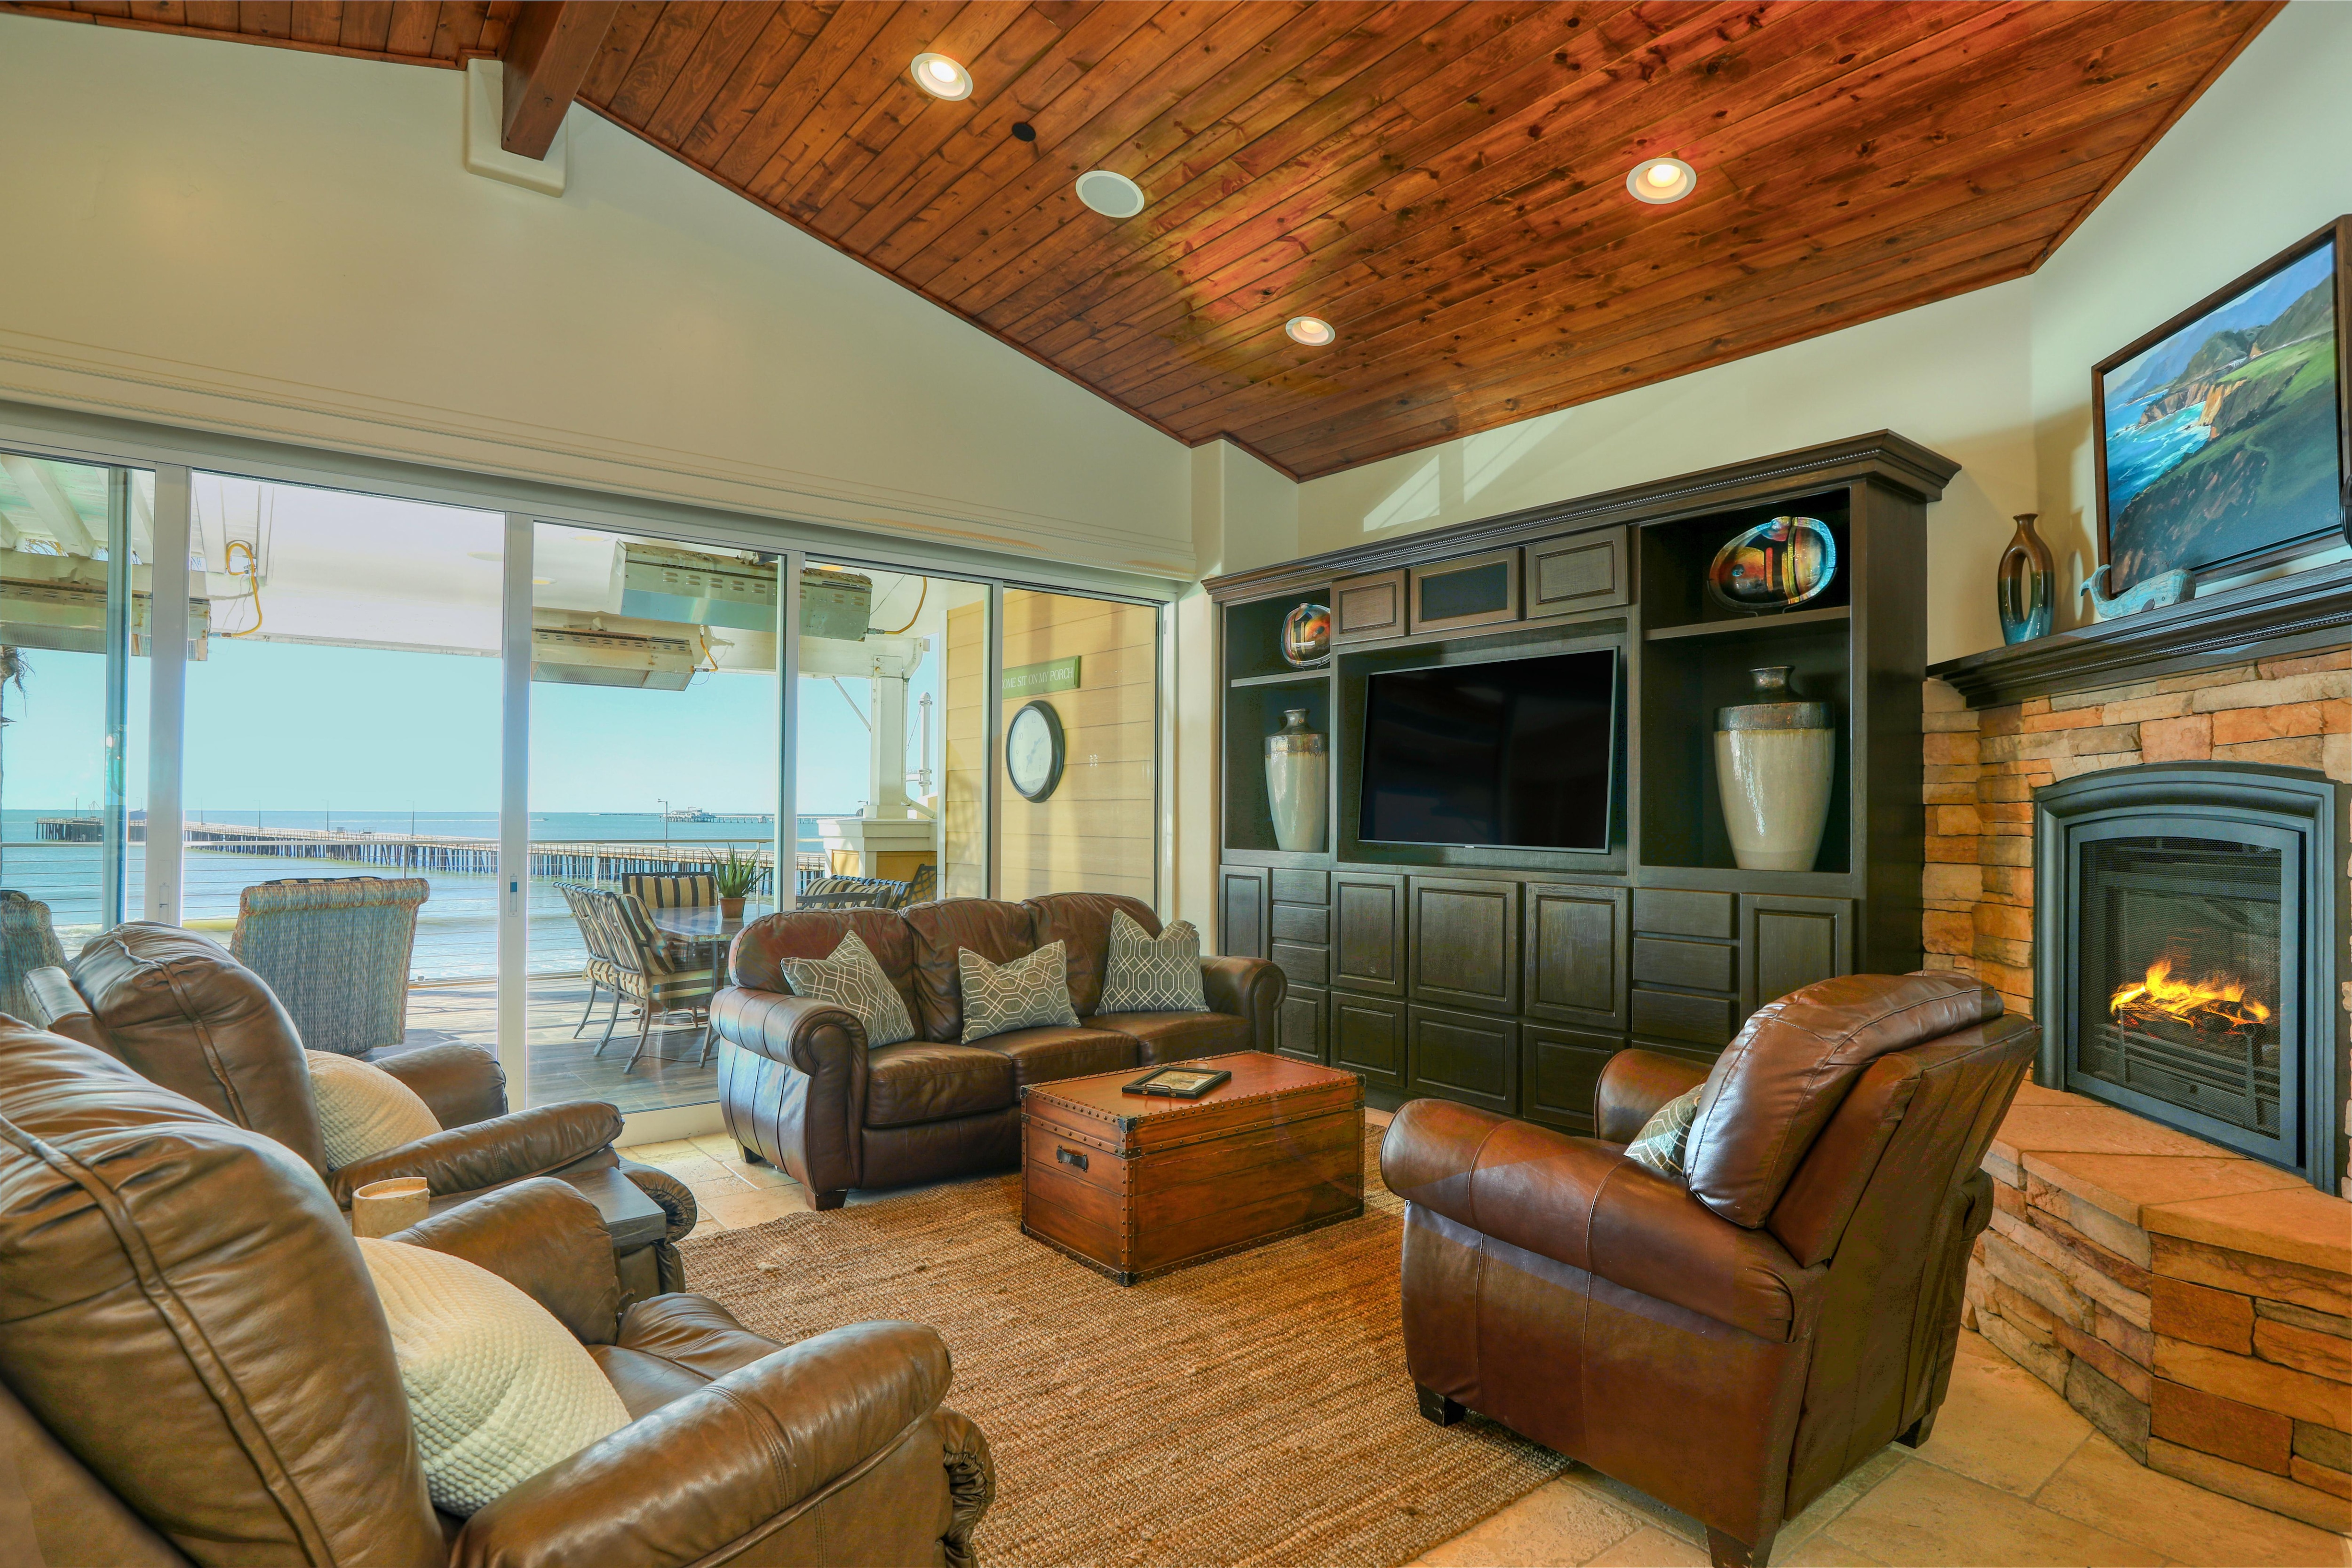 Take in the elements while lounging with friends. As the sun sets over the Pacific, cozy up to the fireside.